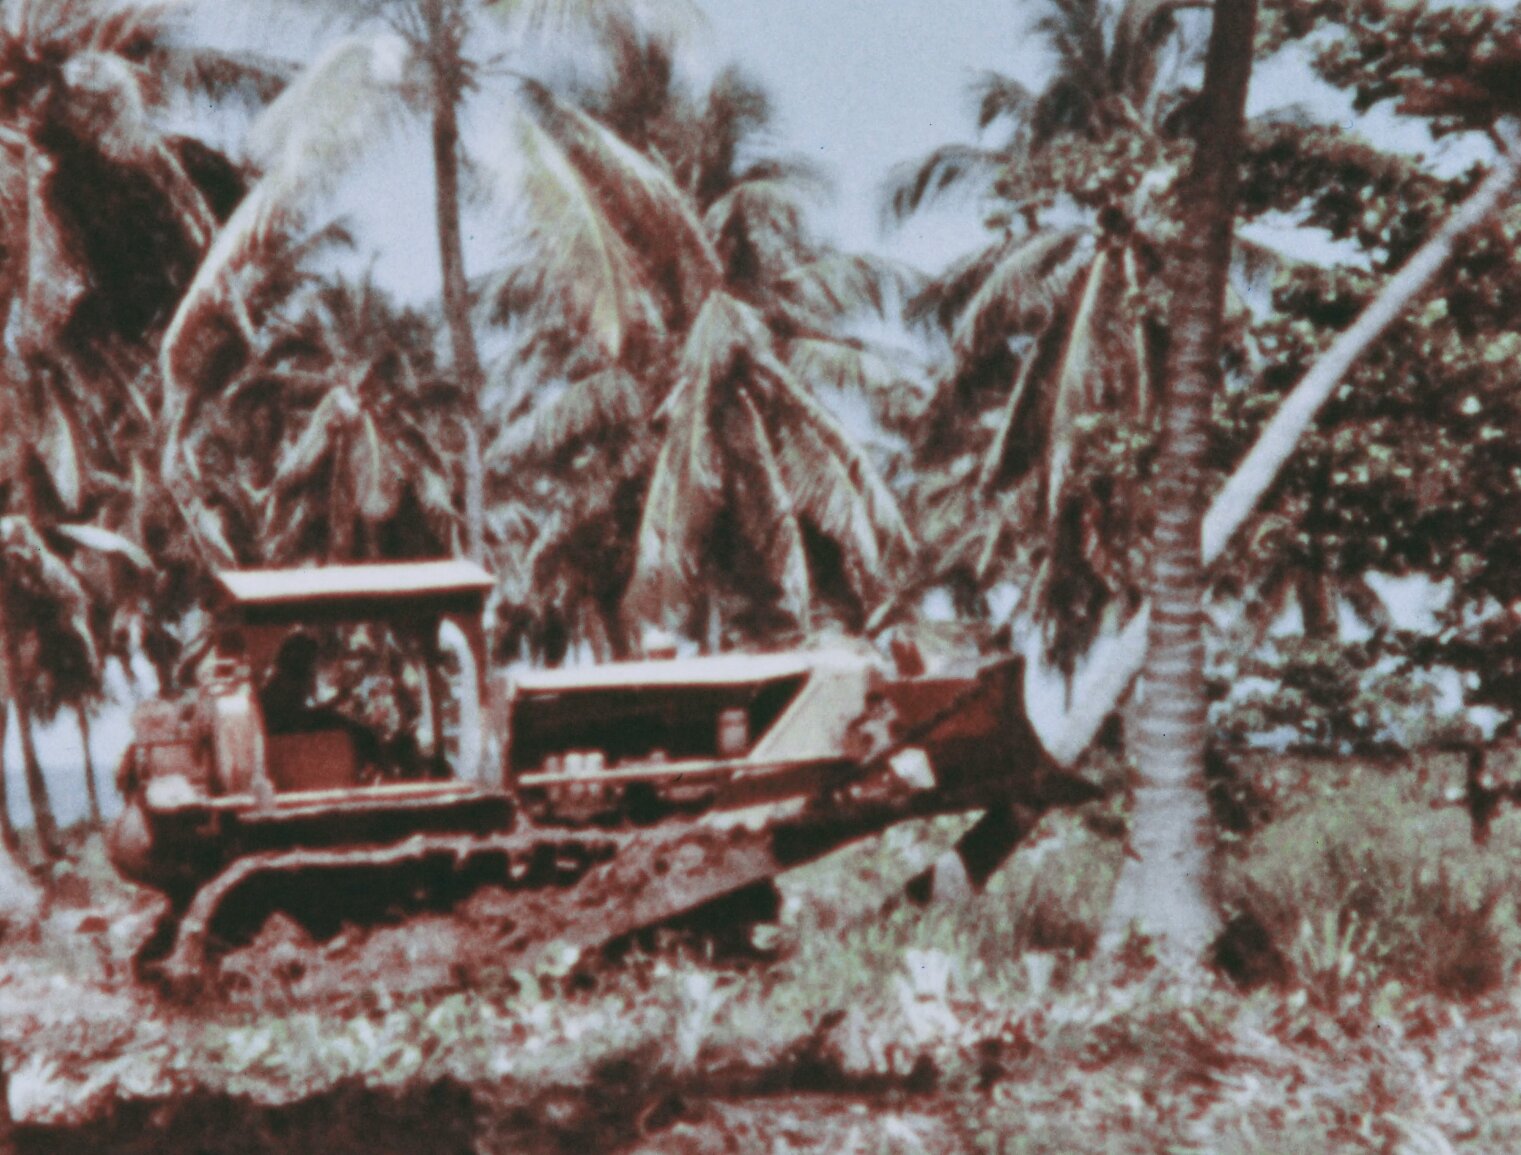 A bulldozer is shown knocking over a palm tree.